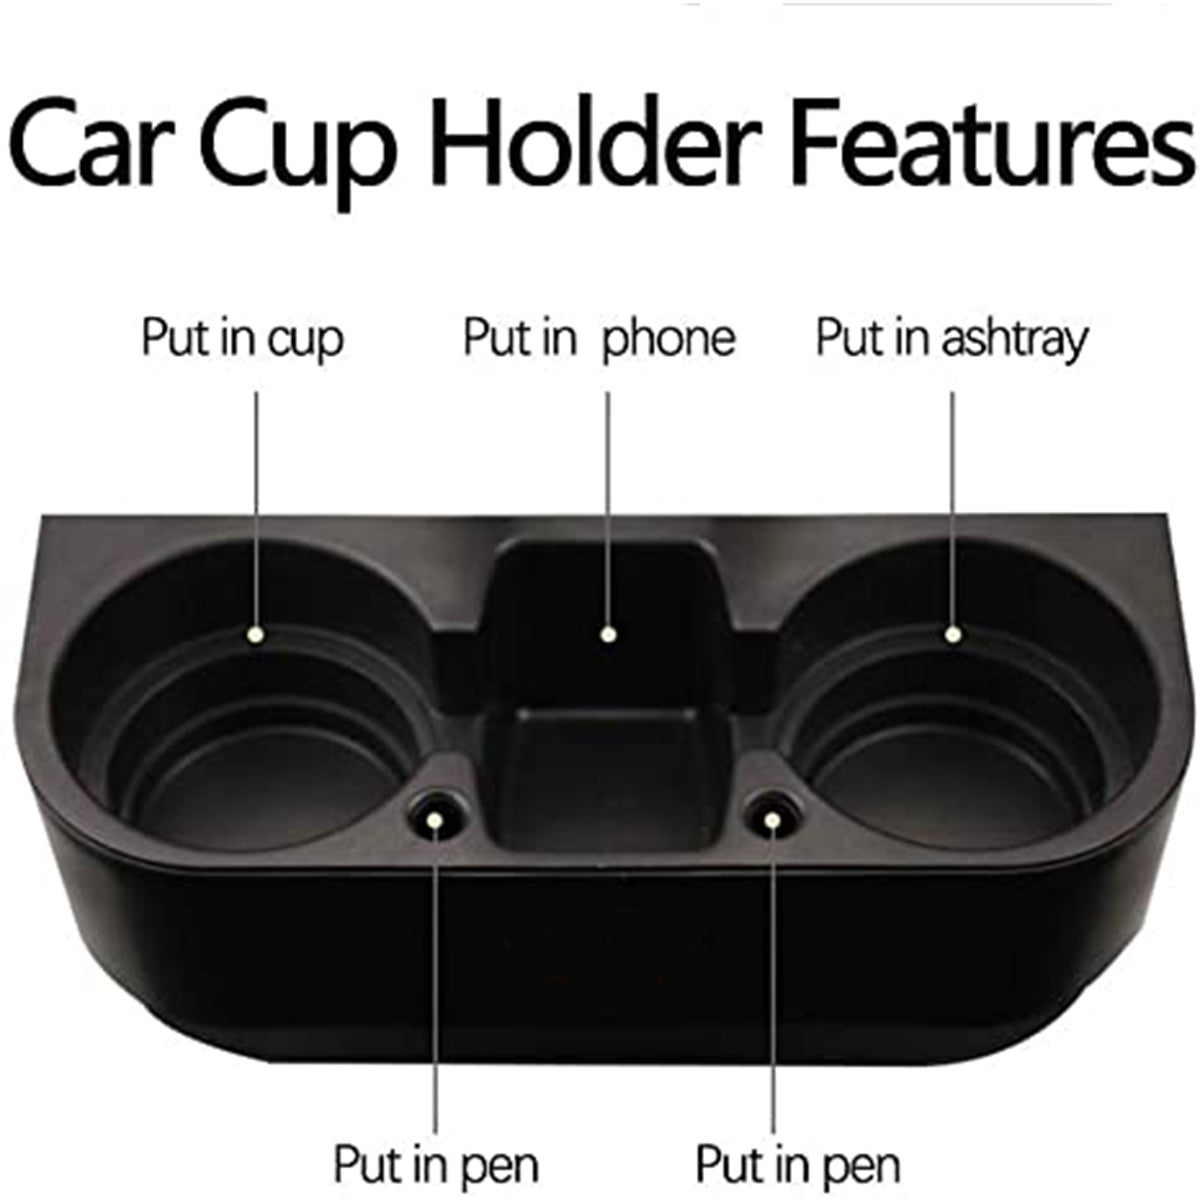 Delicate Leather Cup Holder Portable Multifunction Vehicle Seat Cup Cell Phone Drinks Holder Box Car Interior Organizer, Custom For Your Cars, Car Accessories DE11995 - Delicate Leather